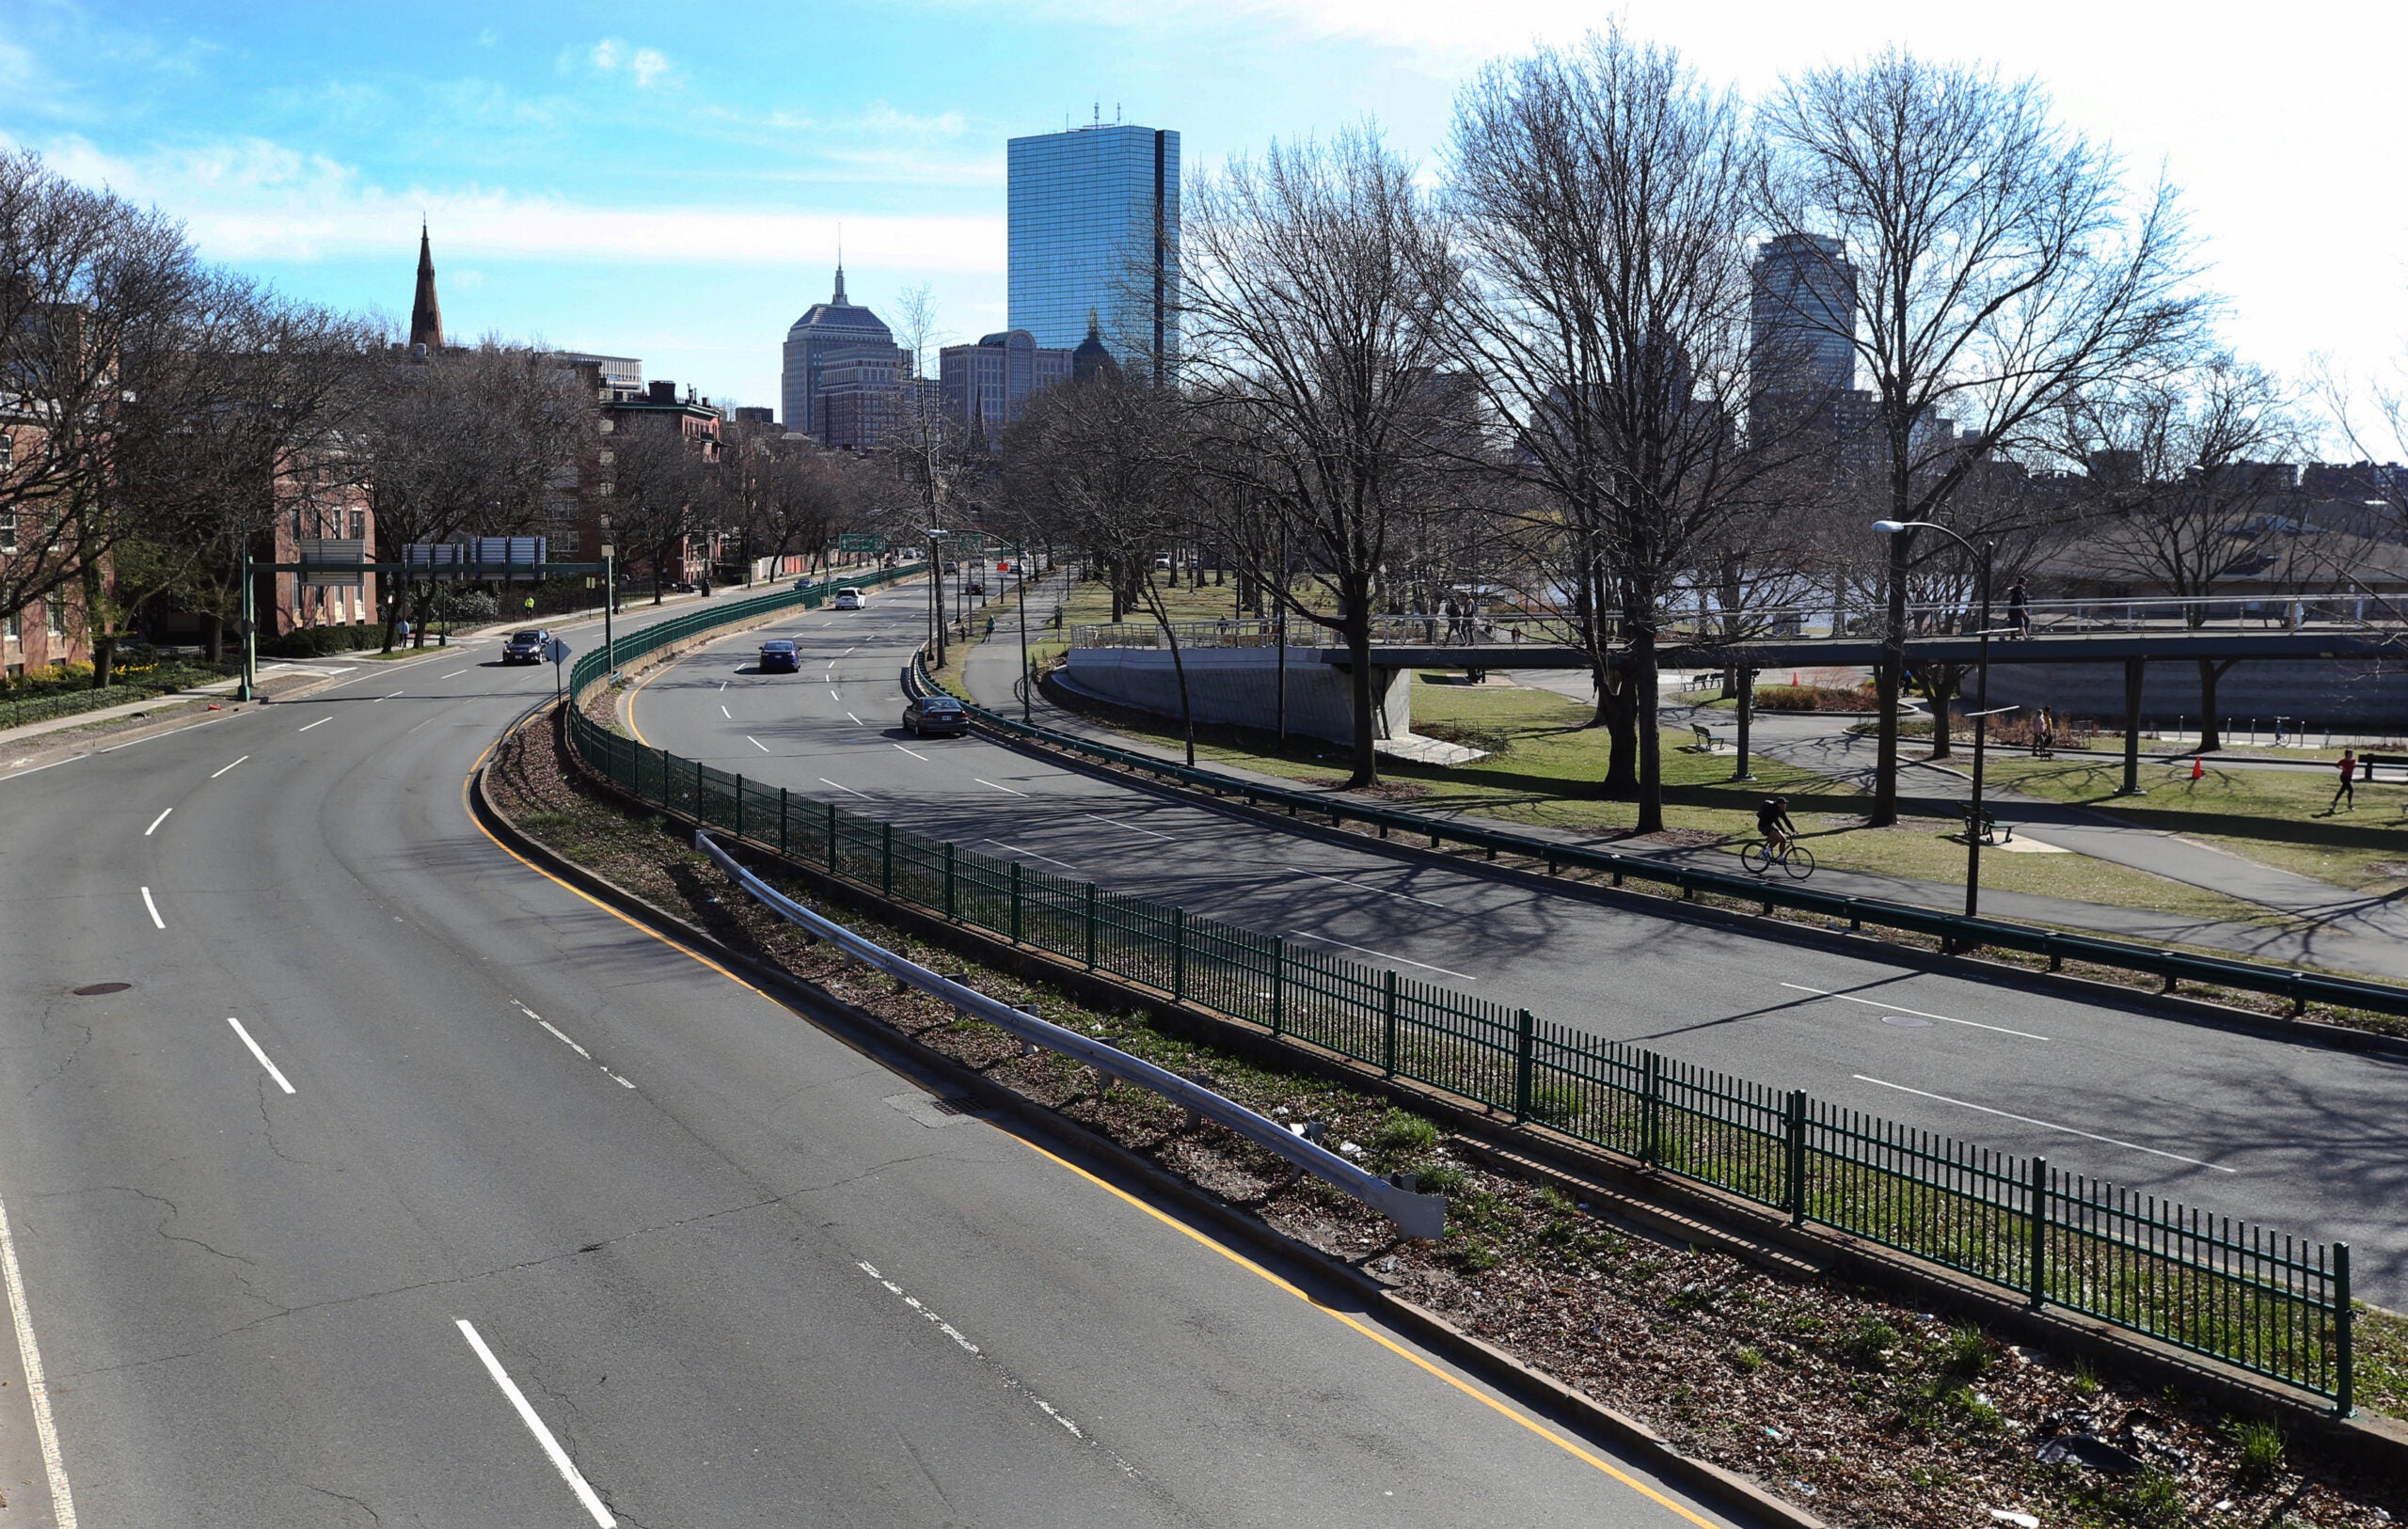 A view of a nearly empty Storrow Drive